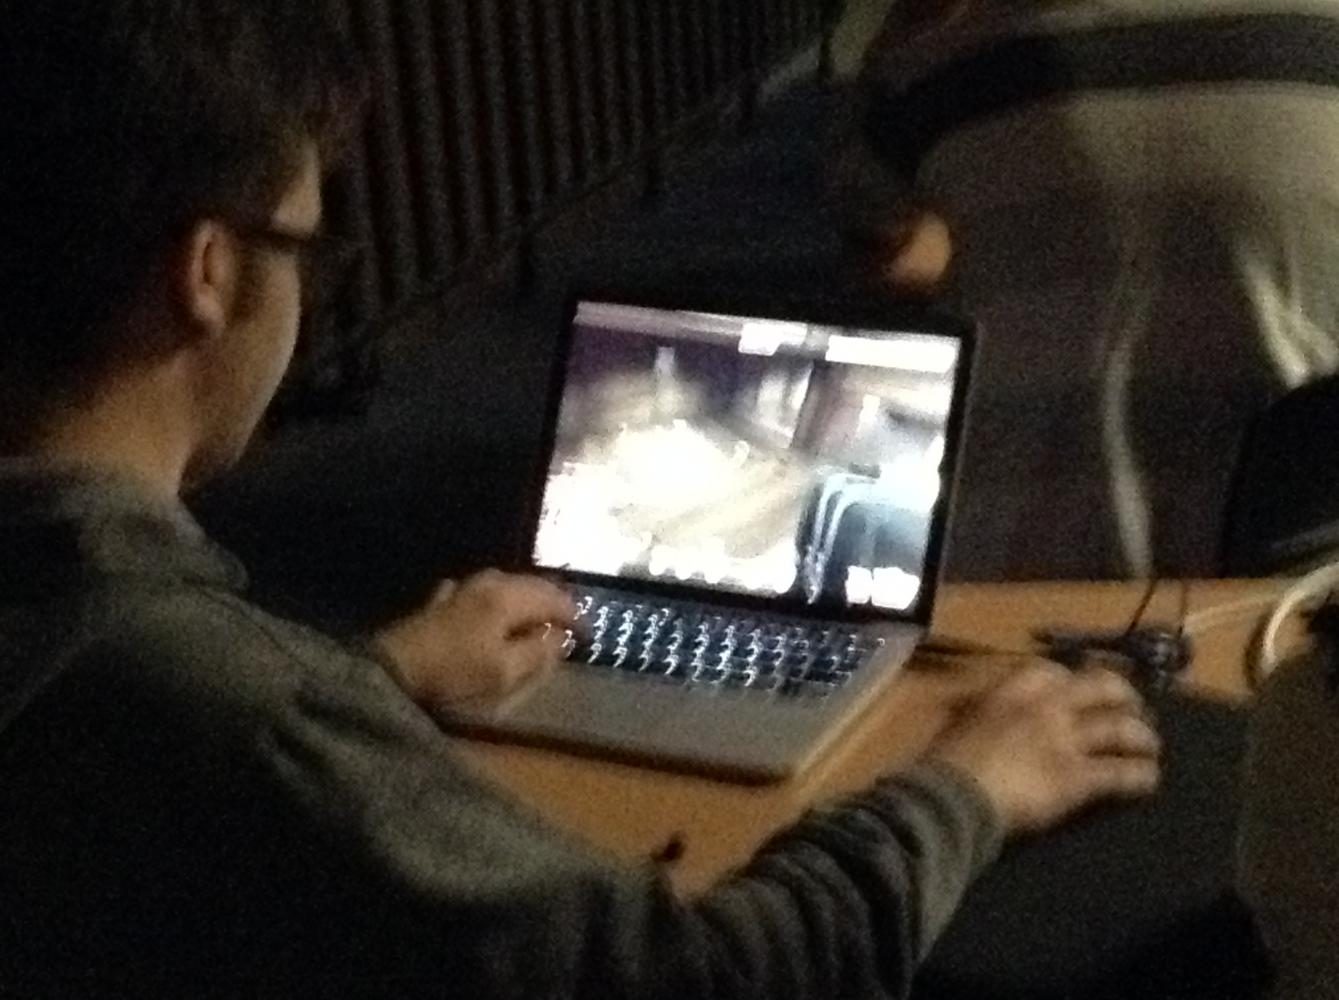 Michael Armato plays Team Fortress 2 on his laptop against another player in the room and others online during the El Camino Esports Club meeting. Photo credit: Don Perez